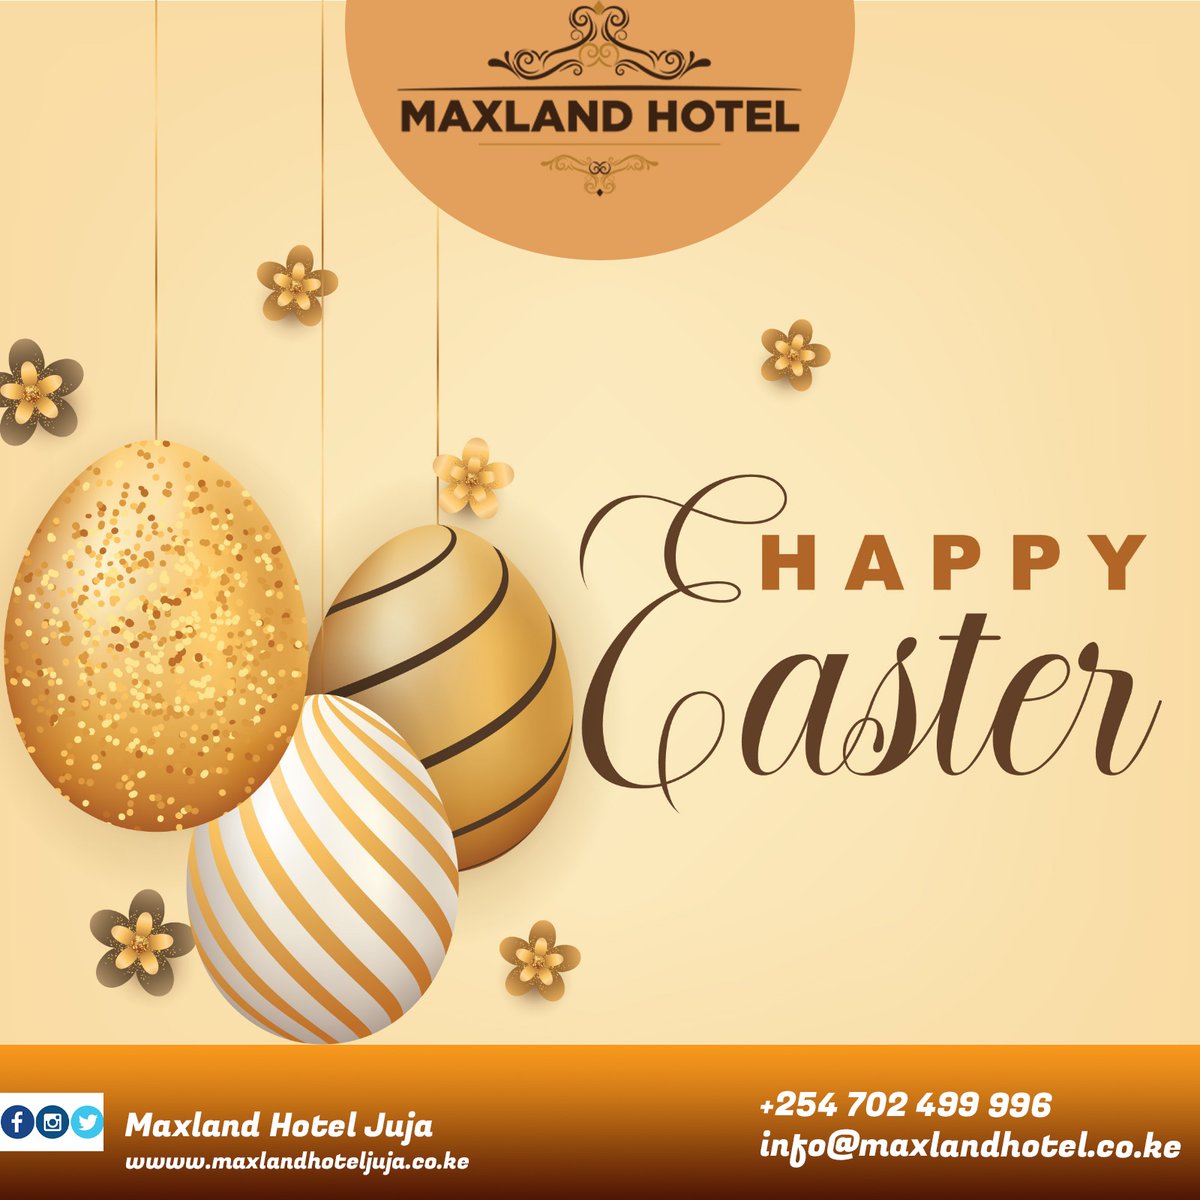 May the Easter bunny bring you lots of joy and laughter this season. We hope you have a wonderful time with your family and friends. Don't forget to check out our special Easter deals.
For Reservations
📧 Email: info@maxlandhotel.co.ke⠀
☎️ Call: 0702 499996
#EasterHolidays2023